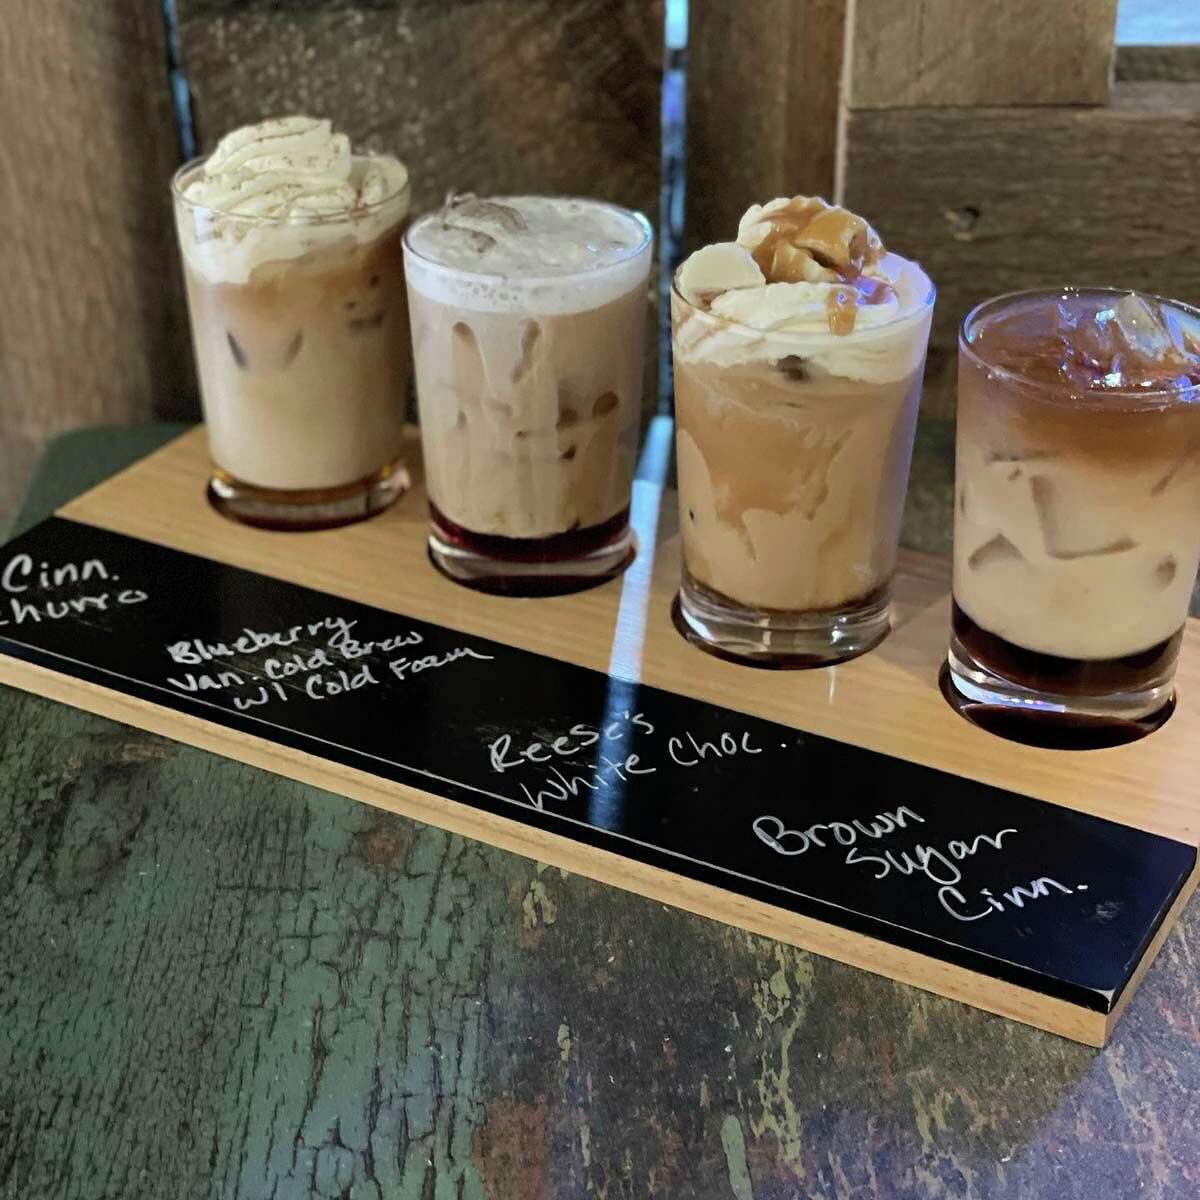 Try an iced coffee “flight” at TJ’s Burritos, with samples of four unique flavors.